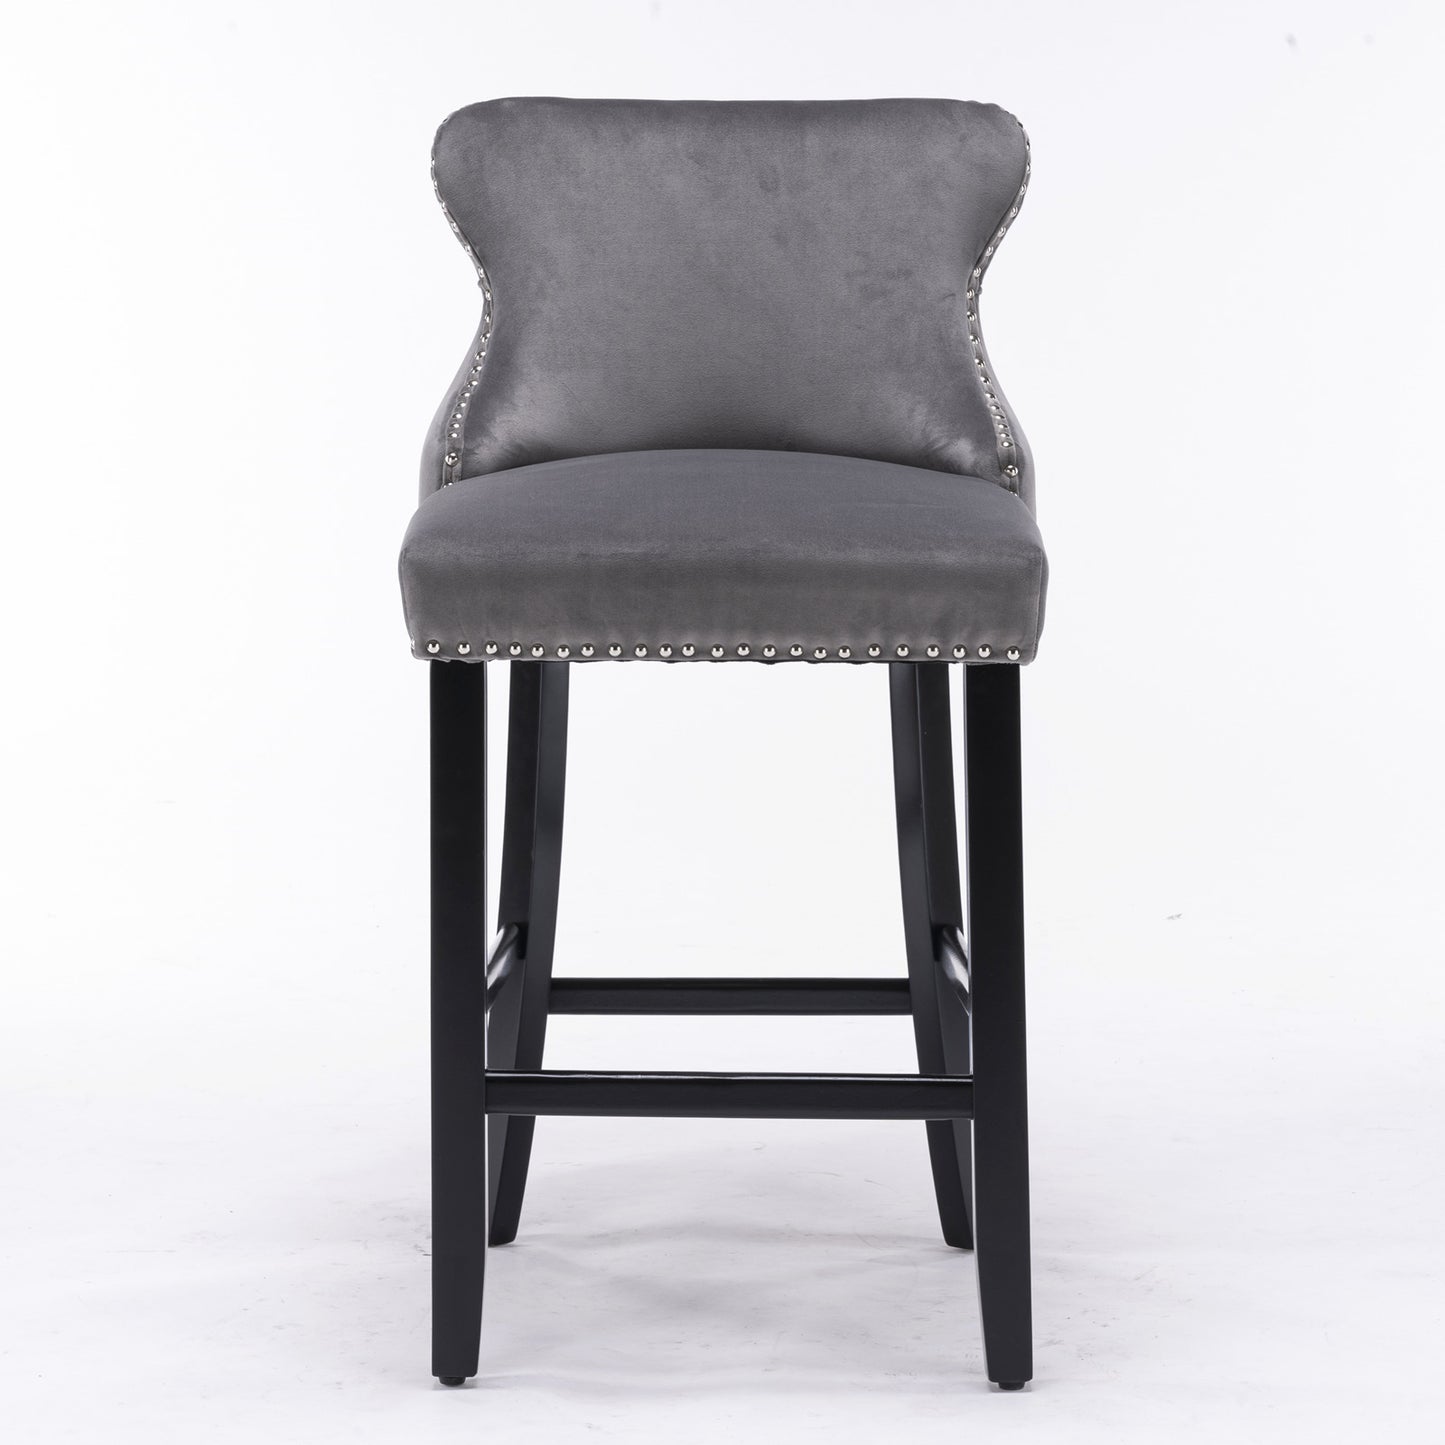 Set of 2, Contemporary Button-Tufted, Velvet Upholstered Wing-Back Barstools with Black Wooden Legs, and Chrome Nail head Trim